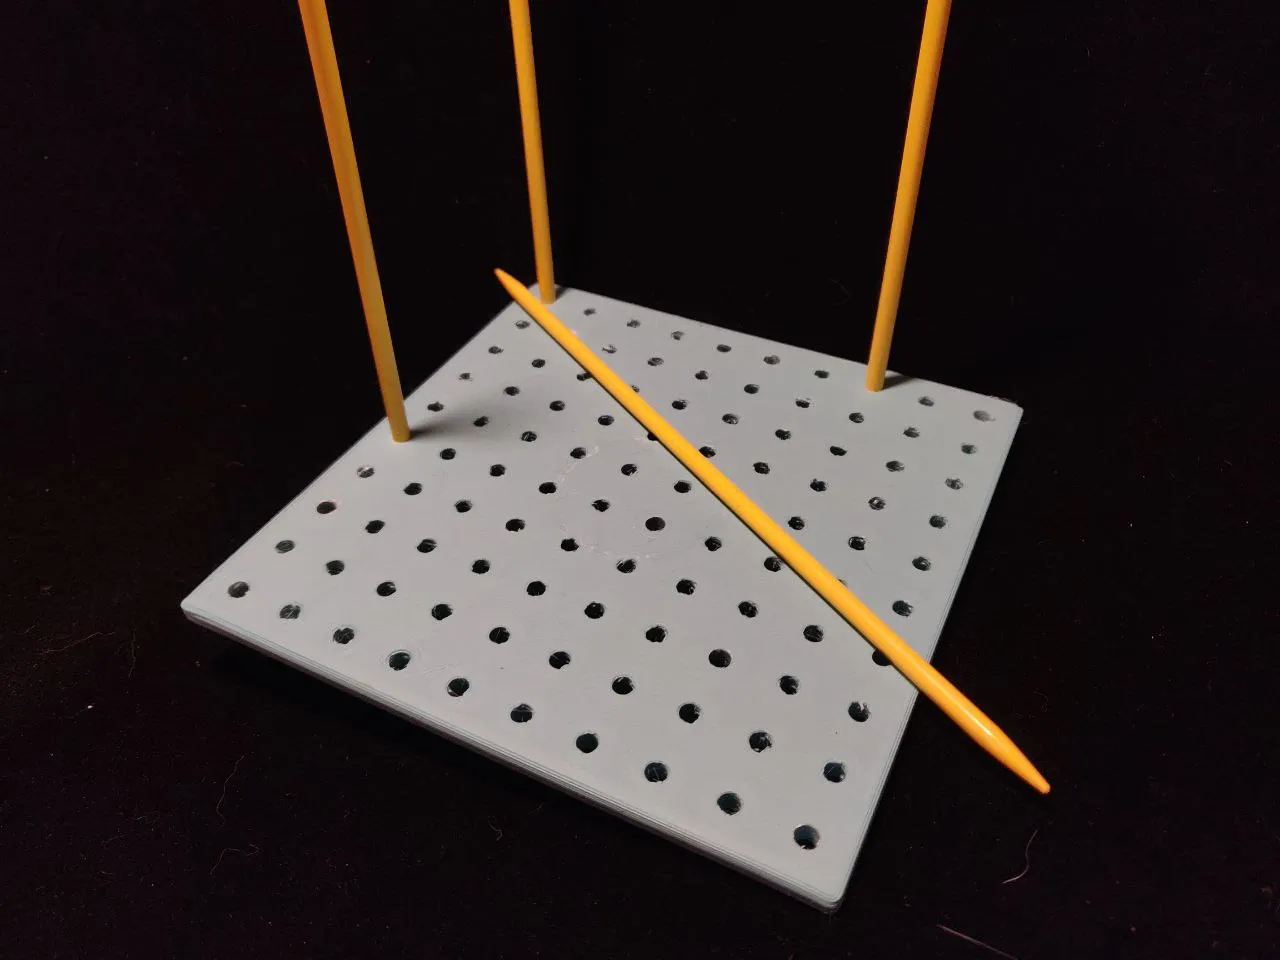 Blocking Board For Knitting and Crochet Projects, 3D Printed, W/Wooden  Dowels